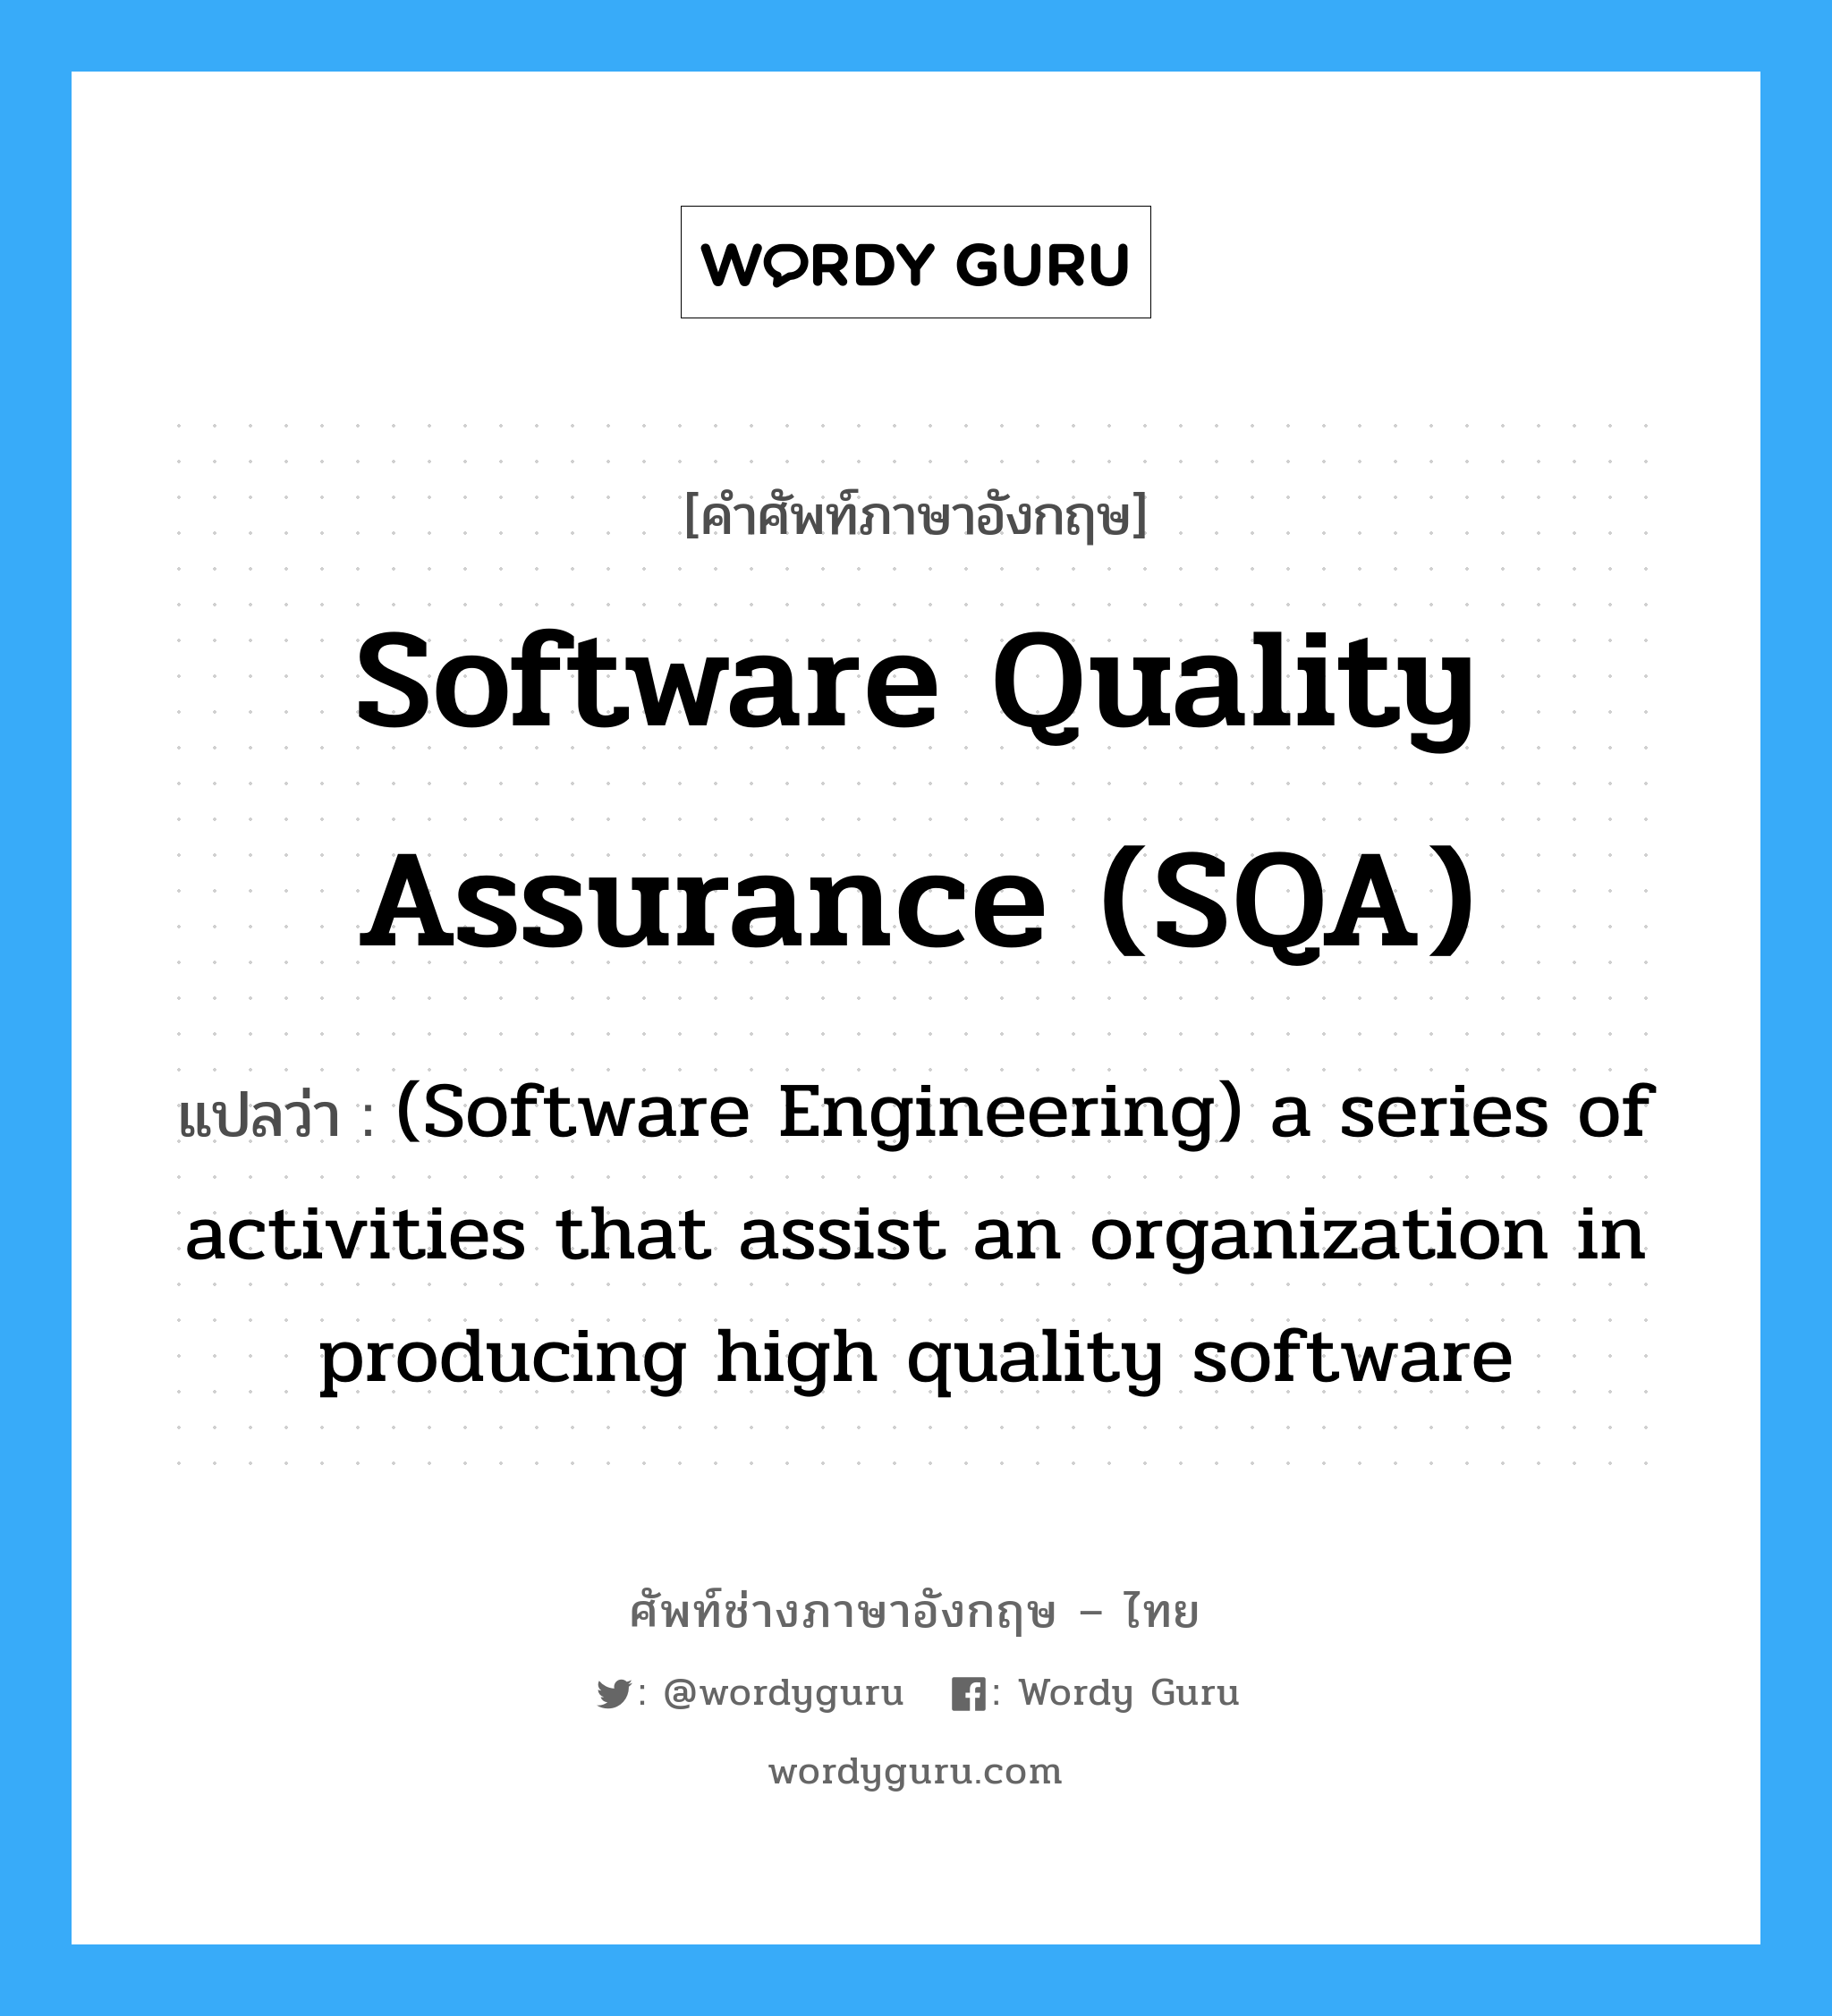 (Software Engineering) a series of activities that transform legacy systems (with poor maintainability) into software that exhibits high quality ภาษาอังกฤษ?, คำศัพท์ช่างภาษาอังกฤษ - ไทย (Software Engineering) a series of activities that assist an organization in producing high quality software คำศัพท์ภาษาอังกฤษ (Software Engineering) a series of activities that assist an organization in producing high quality software แปลว่า Software quality assurance (SQA)